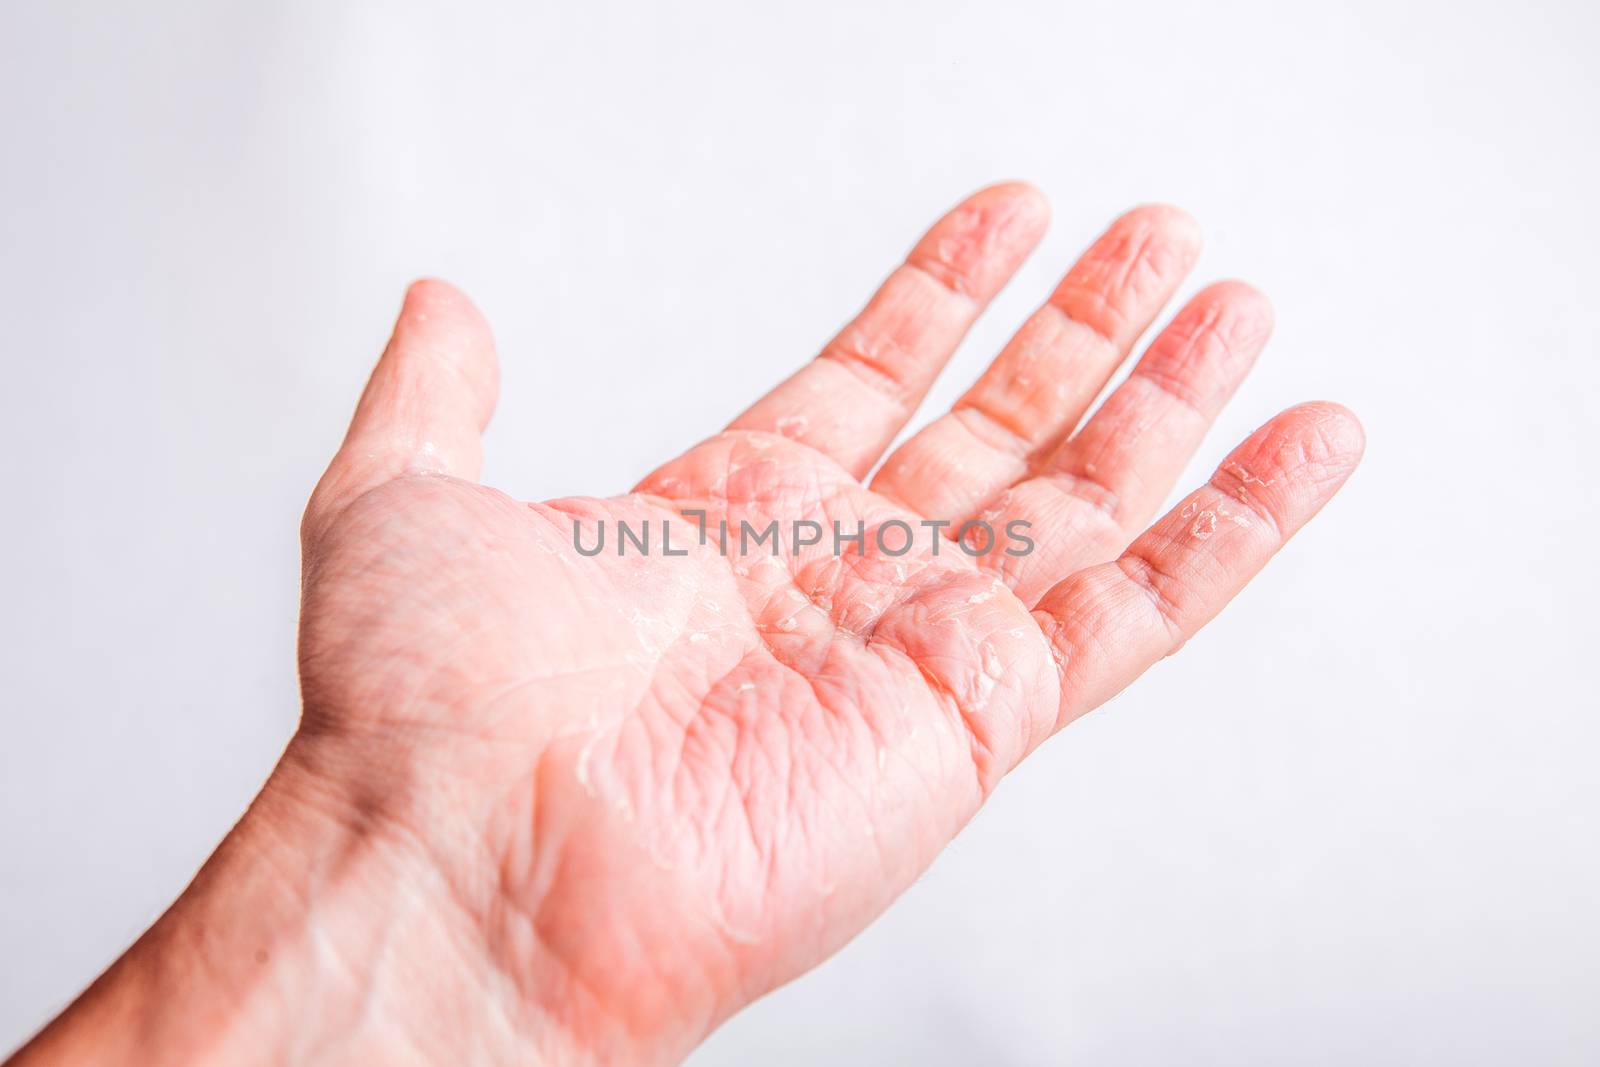 The problem with many people - eczema on hand. Isolated background.